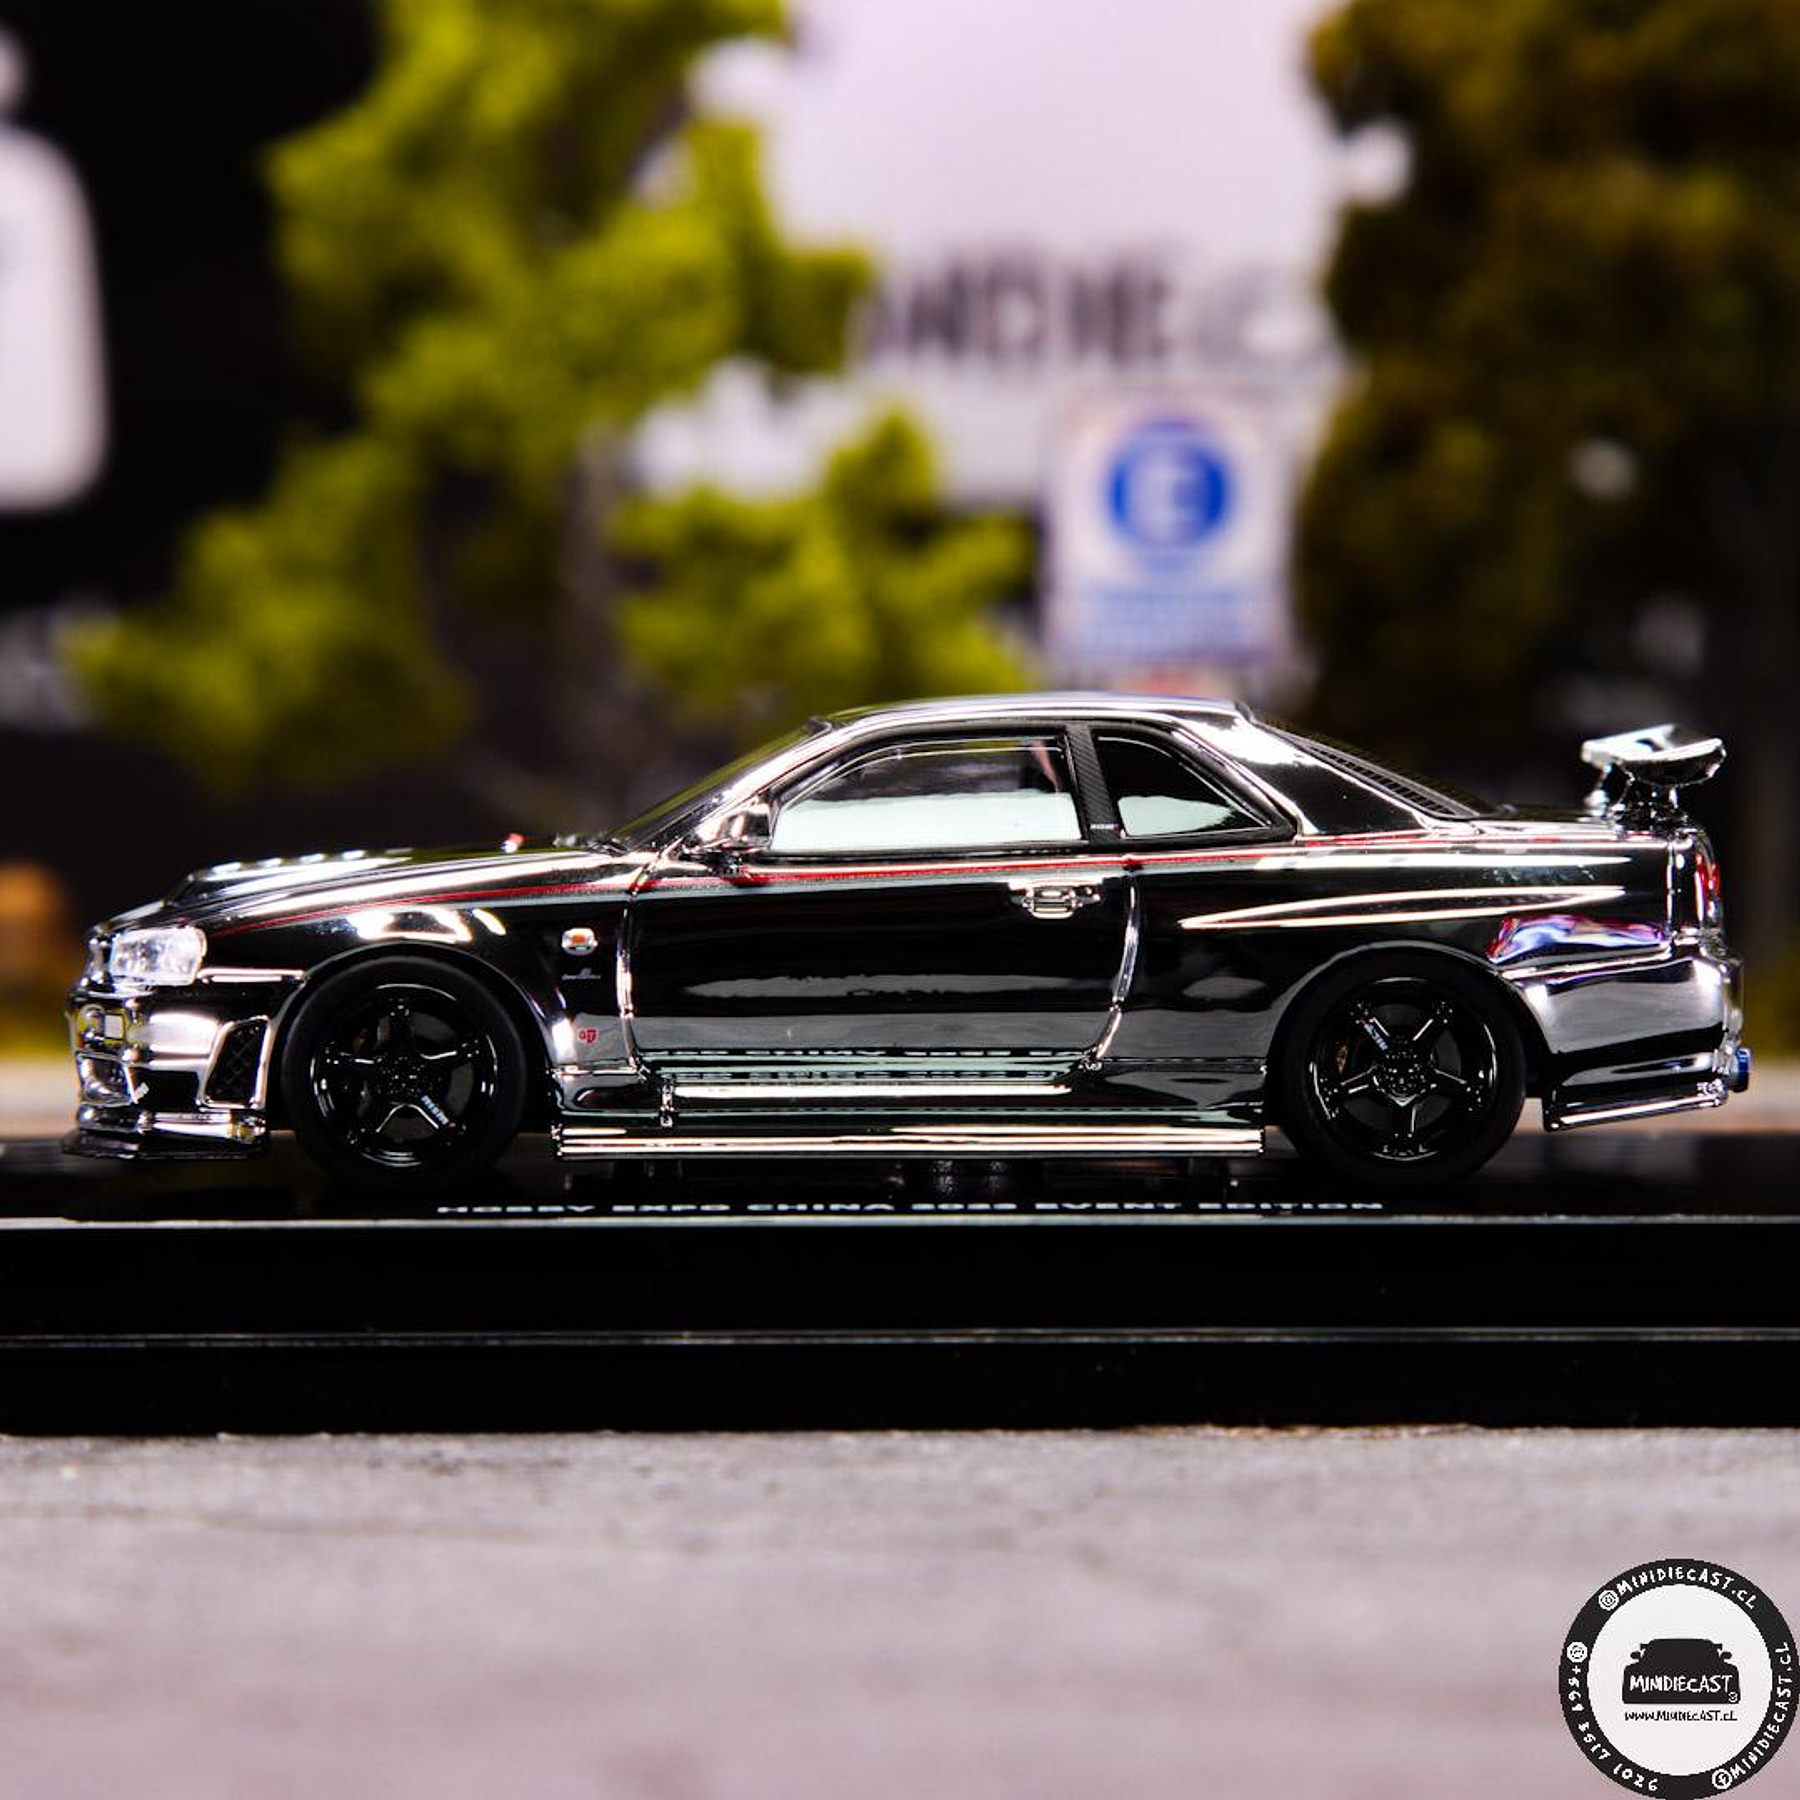 Pack 3 INNO 1:64 Nissan Skyline  GT-R R34 NISMO R-Tune Chrome Hobby Expo China 2023 Event Edition. GOLD. BLACK & SILVER